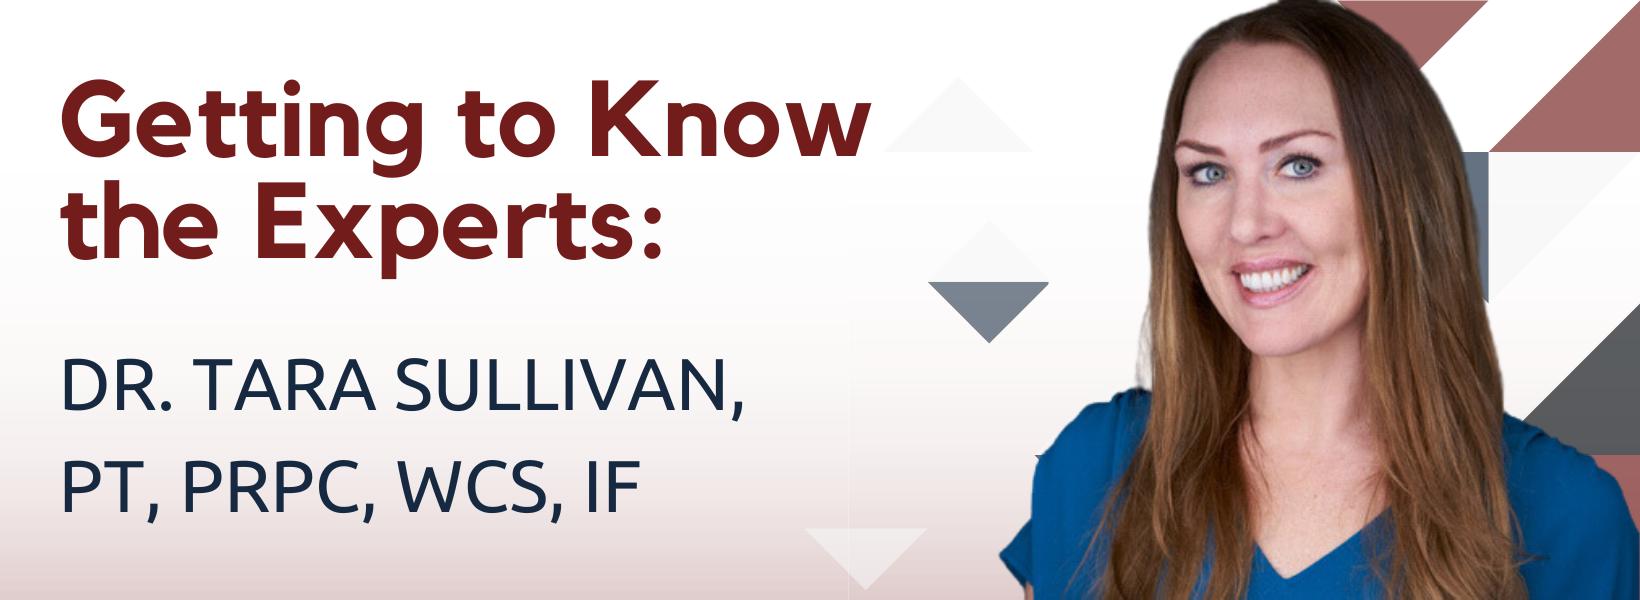 Getting to Know the Experts: Dr. Tara Sullivan